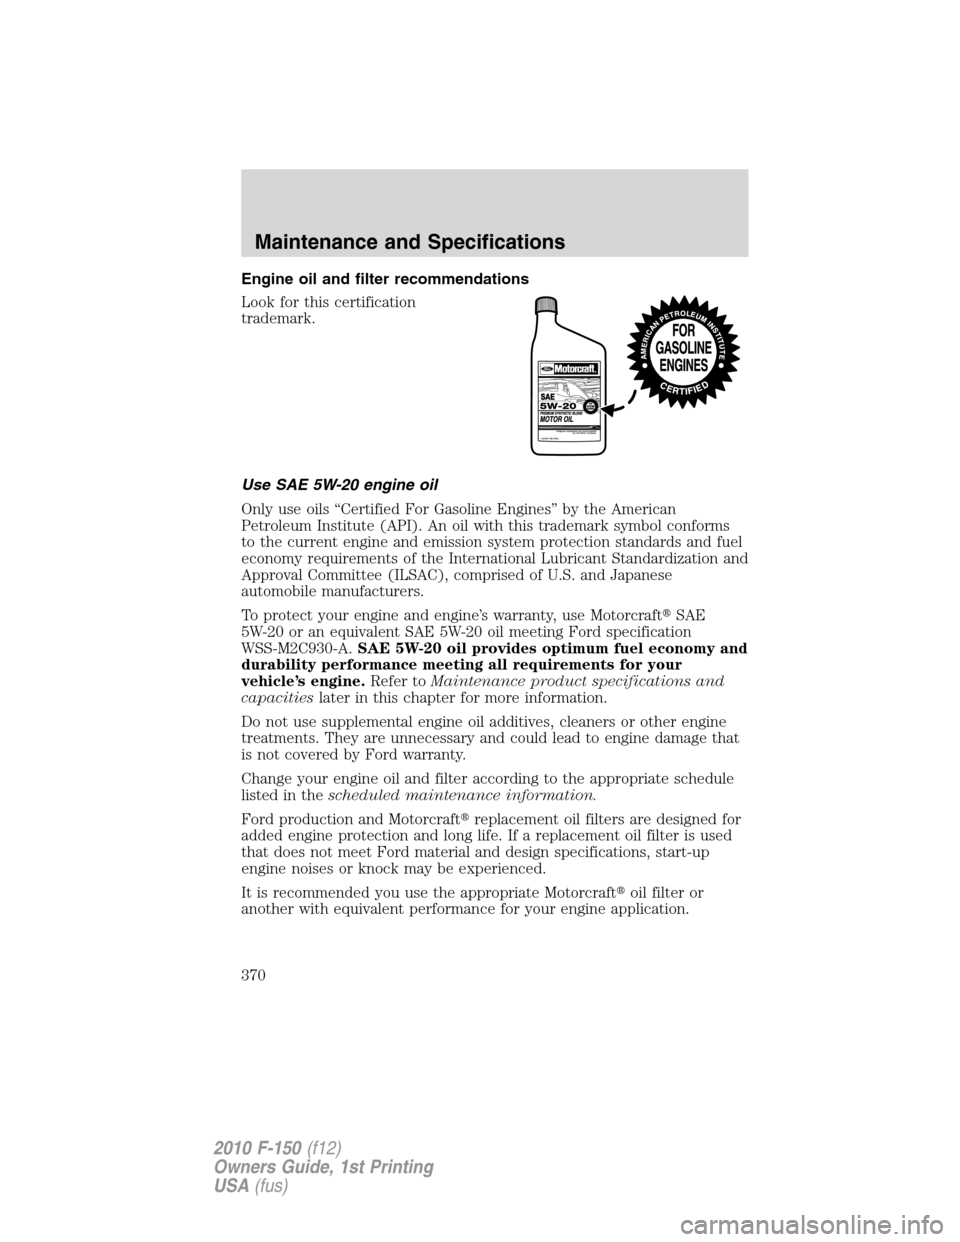 FORD F150 2010 12.G Owners Manual Engine oil and filter recommendations
Look for this certification
trademark.
Use SAE 5W-20 engine oil
Only use oils “Certified For Gasoline Engines” by the American
Petroleum Institute (API). An o